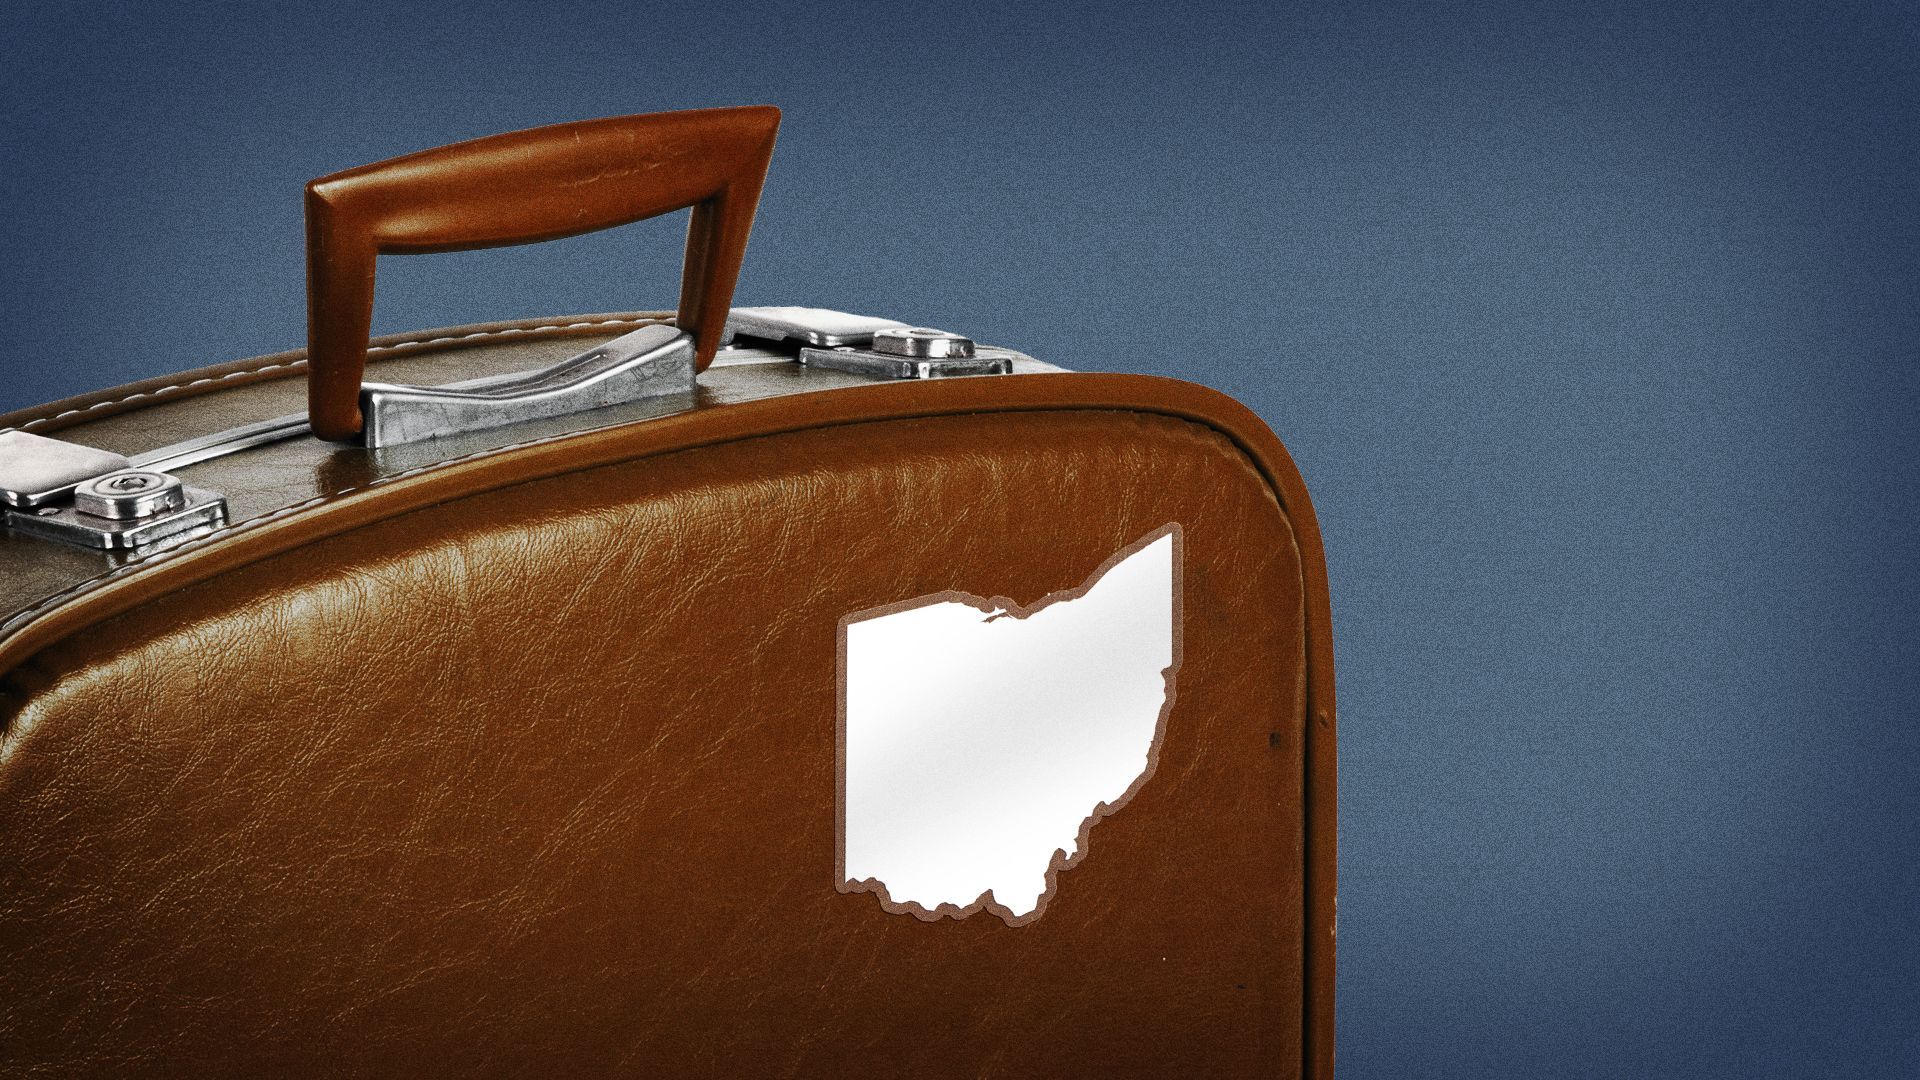 Illustration of a suitcase with a sticker shaped like Ohio.